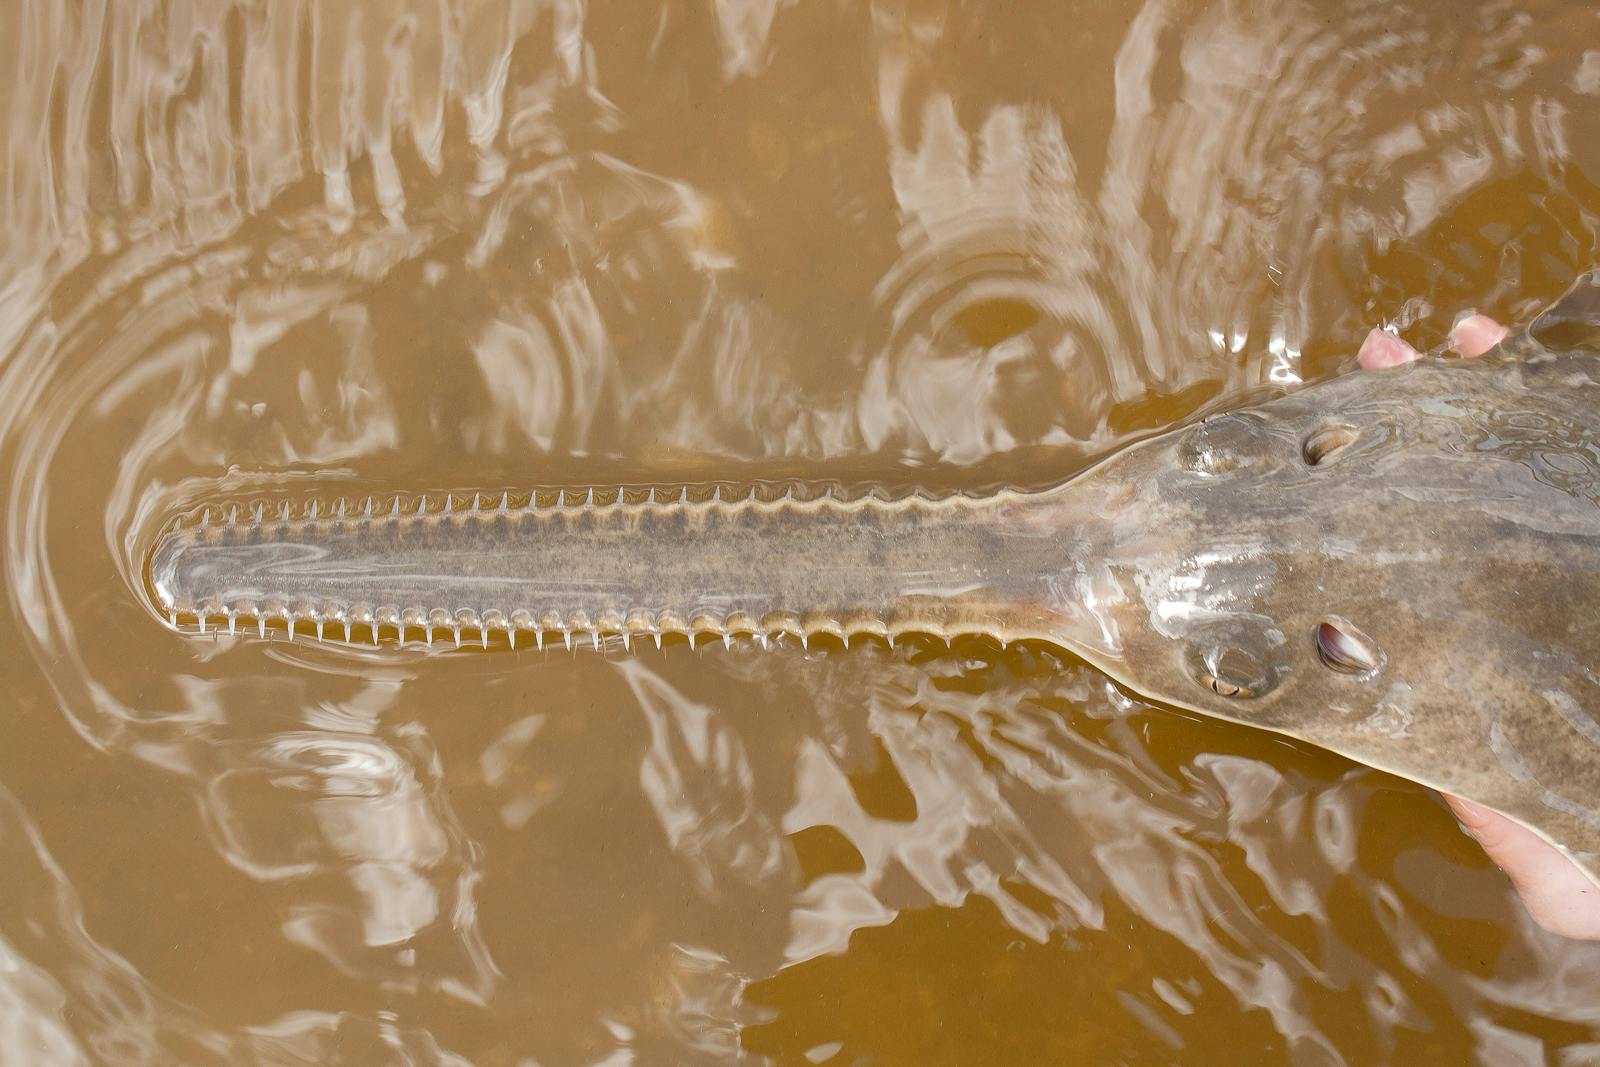 Image for Sawfish “Virgin Birth” Discovery